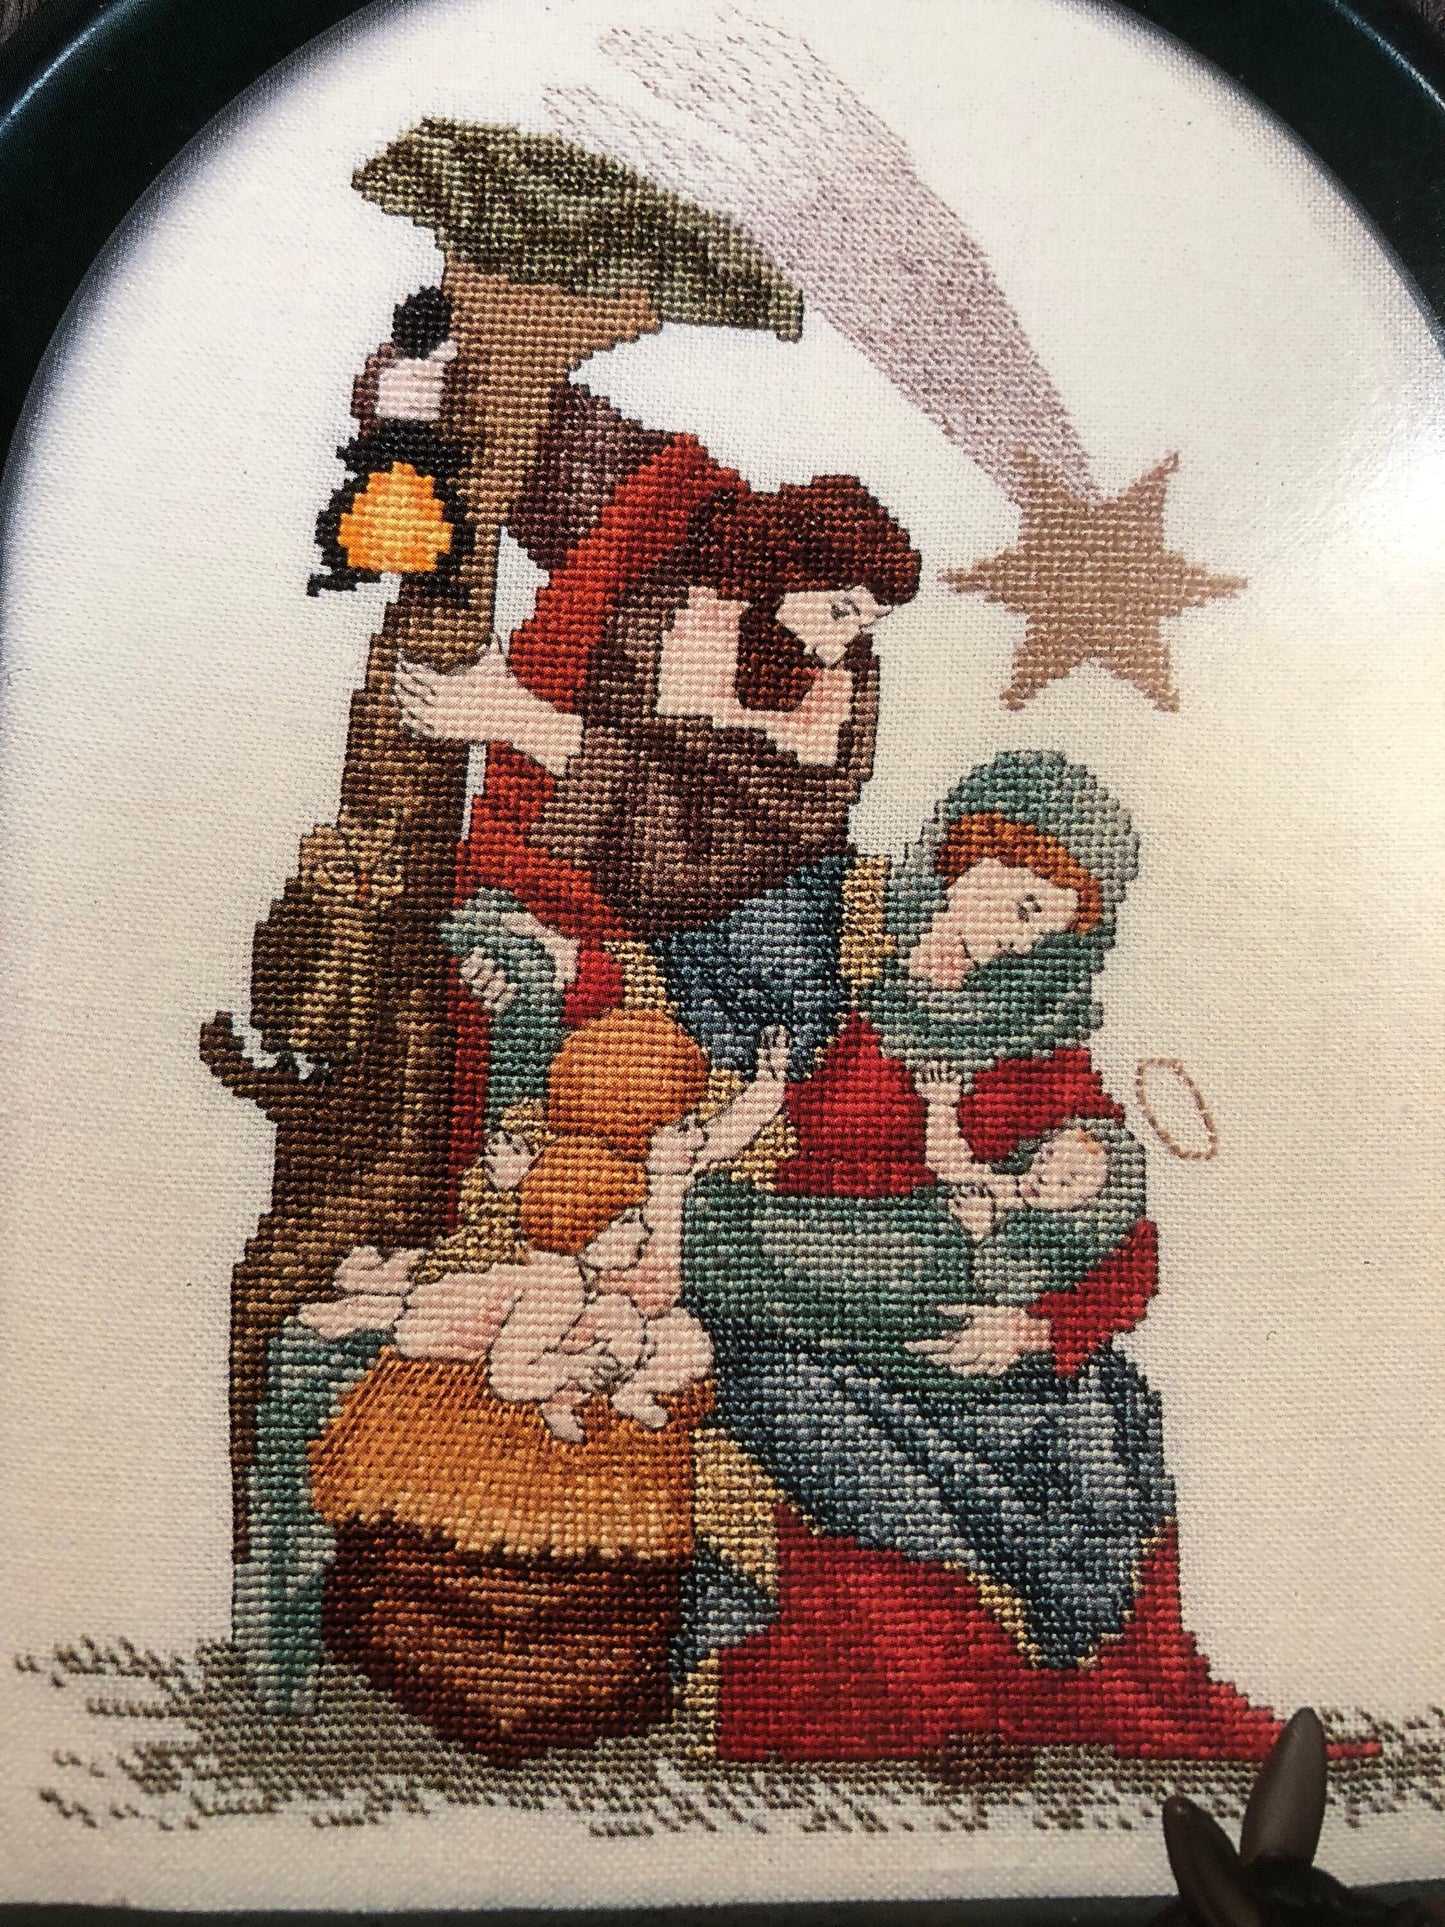 June Grigg, Presents, The Nativity, Vintage 1989, Counted Cross Stitch Pattern